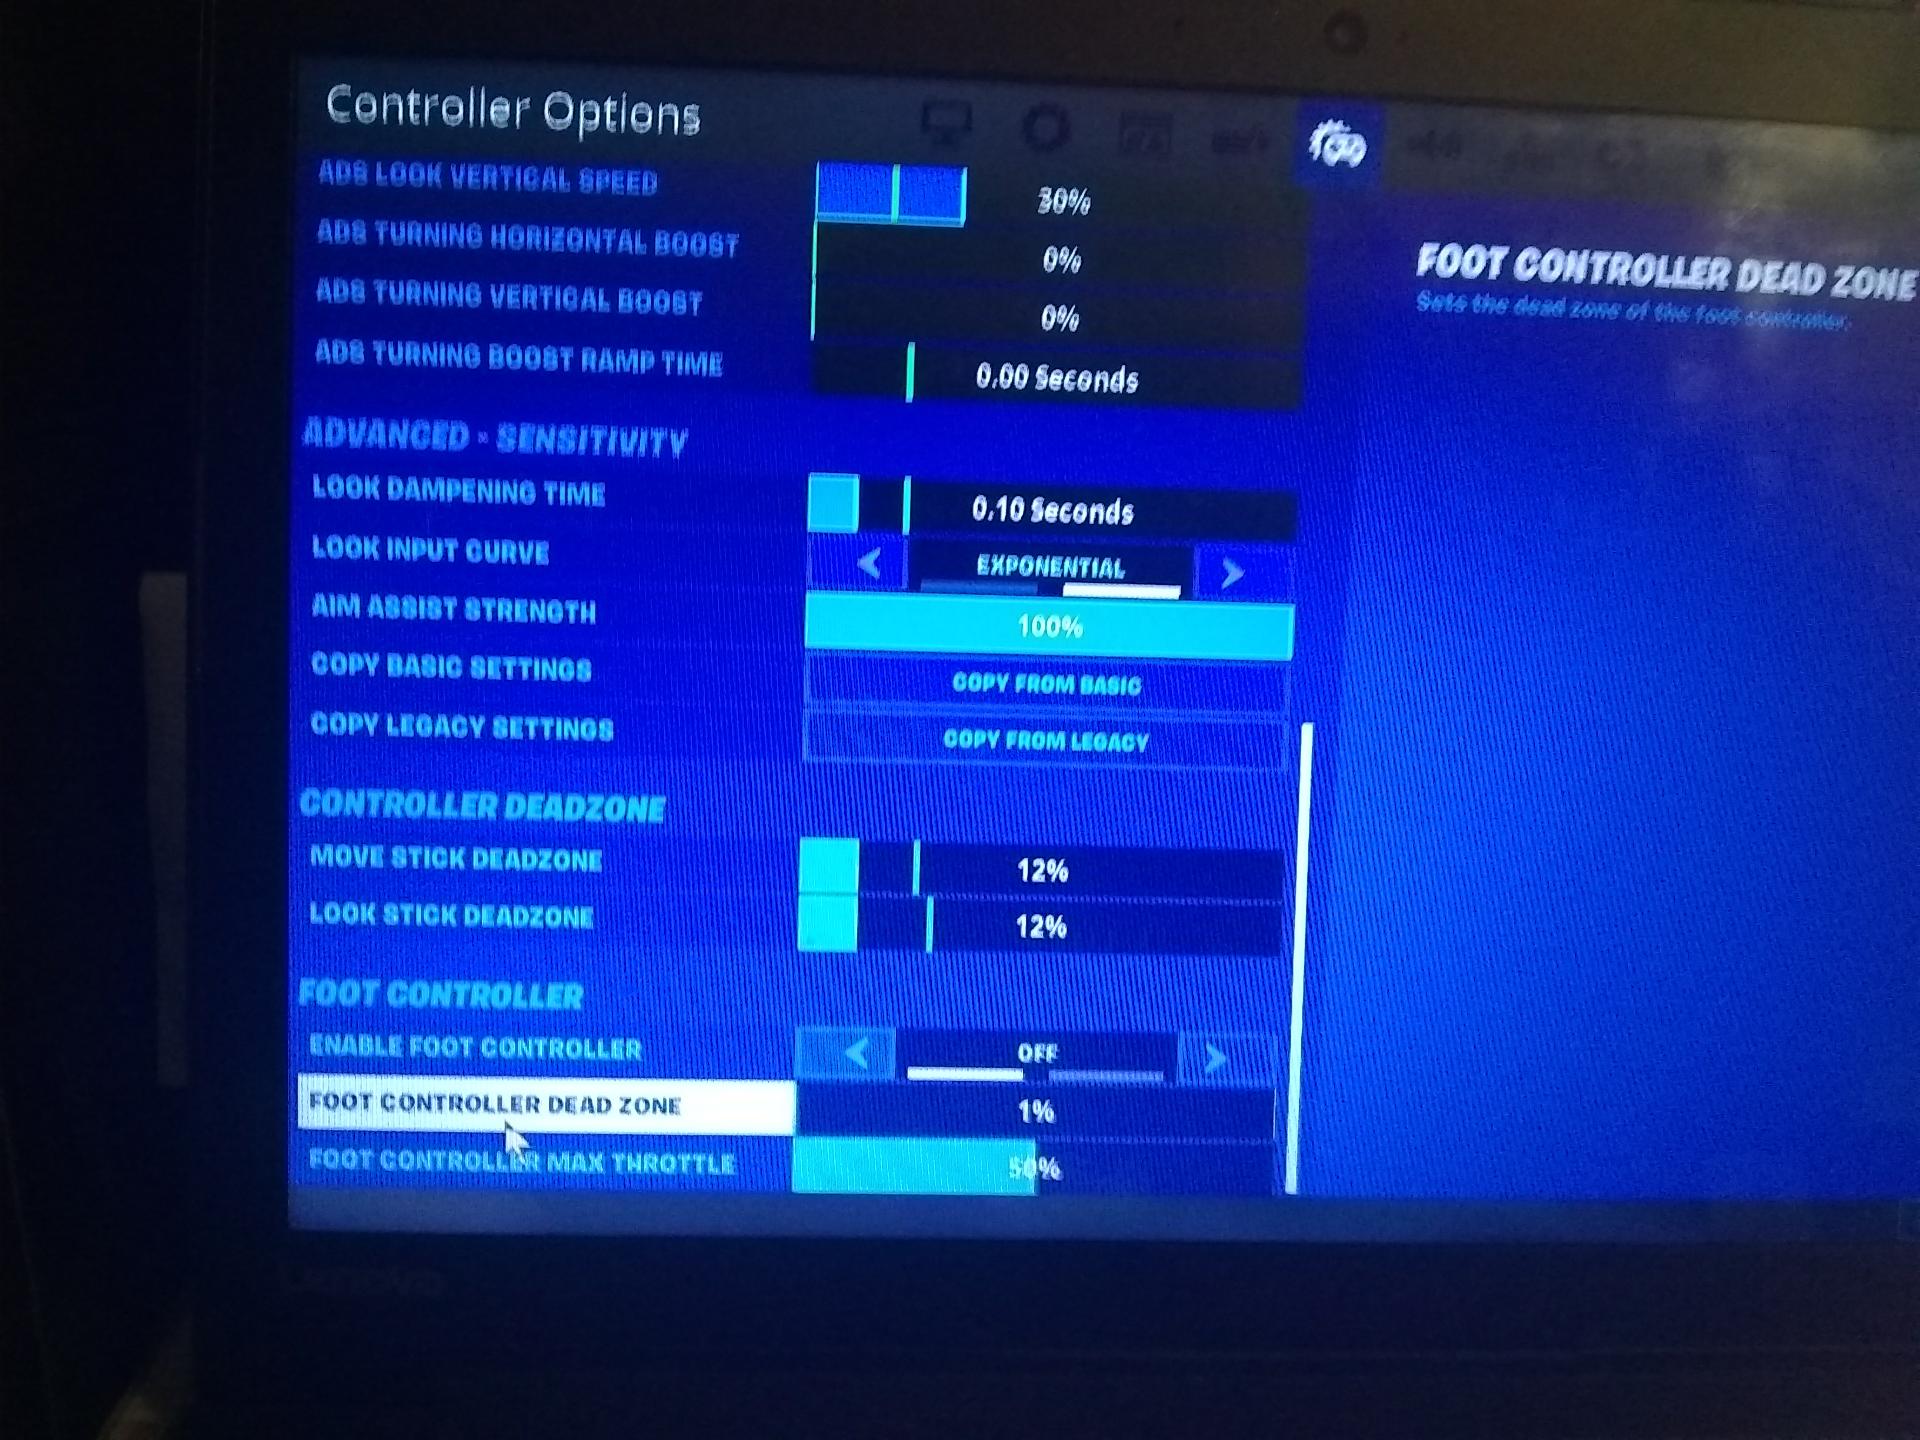 Akrobatik Hong Kong lettelse These controls will give u aimbot PS4/Xbox make sure to sub to my channel  Jaypapo60 | Fortnite